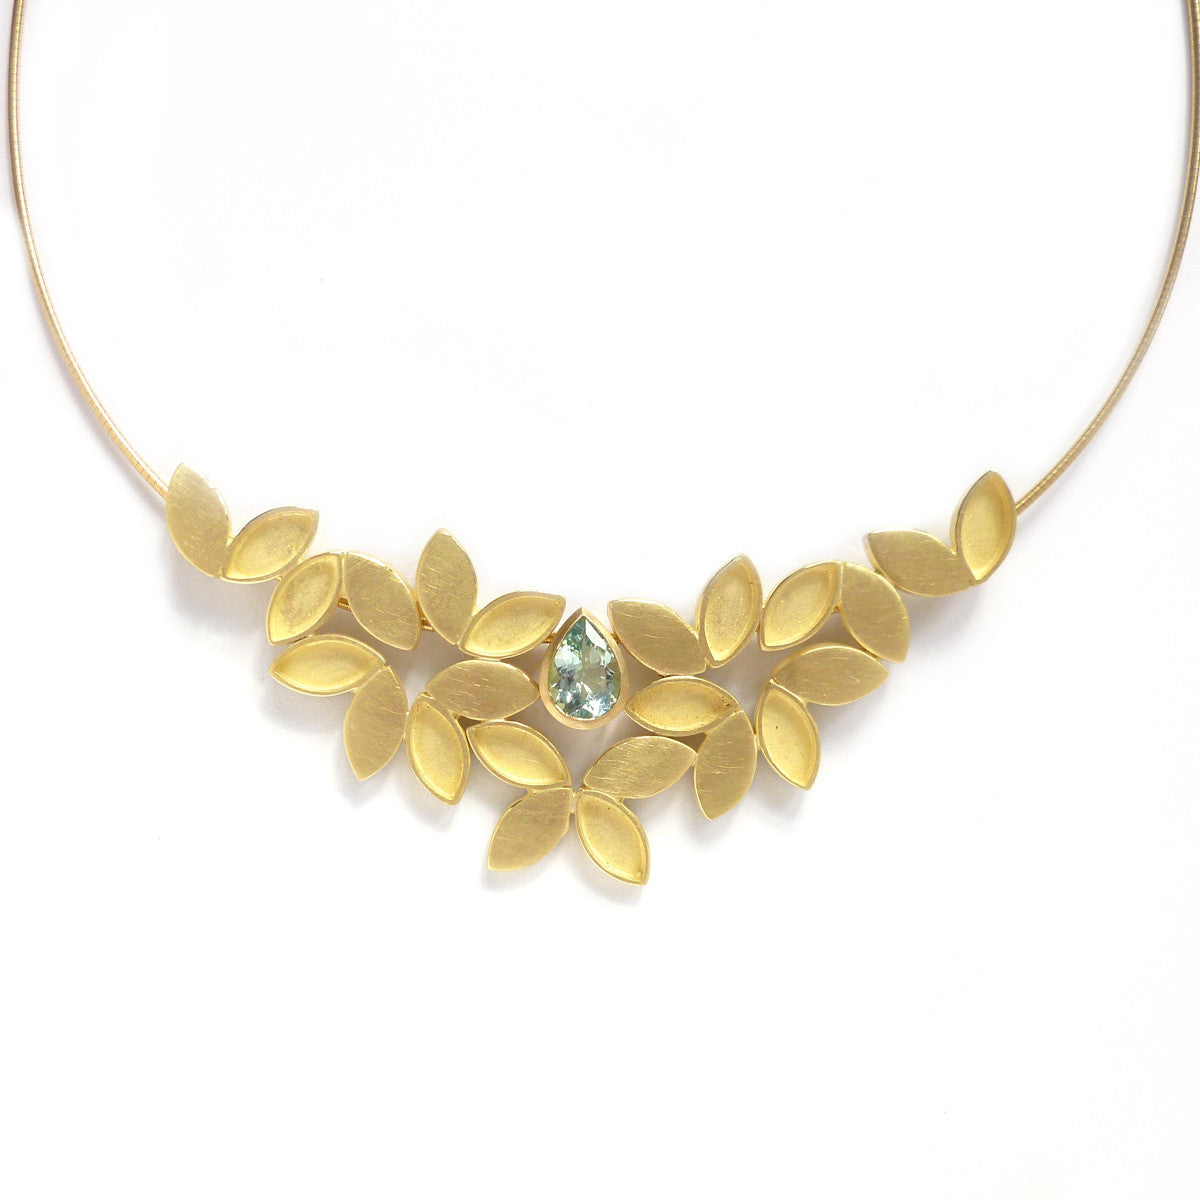 SOLD: 18k Gold and Aquamarine Necklace(OF17) - Sue Lane Contemporary Jewellery - 1